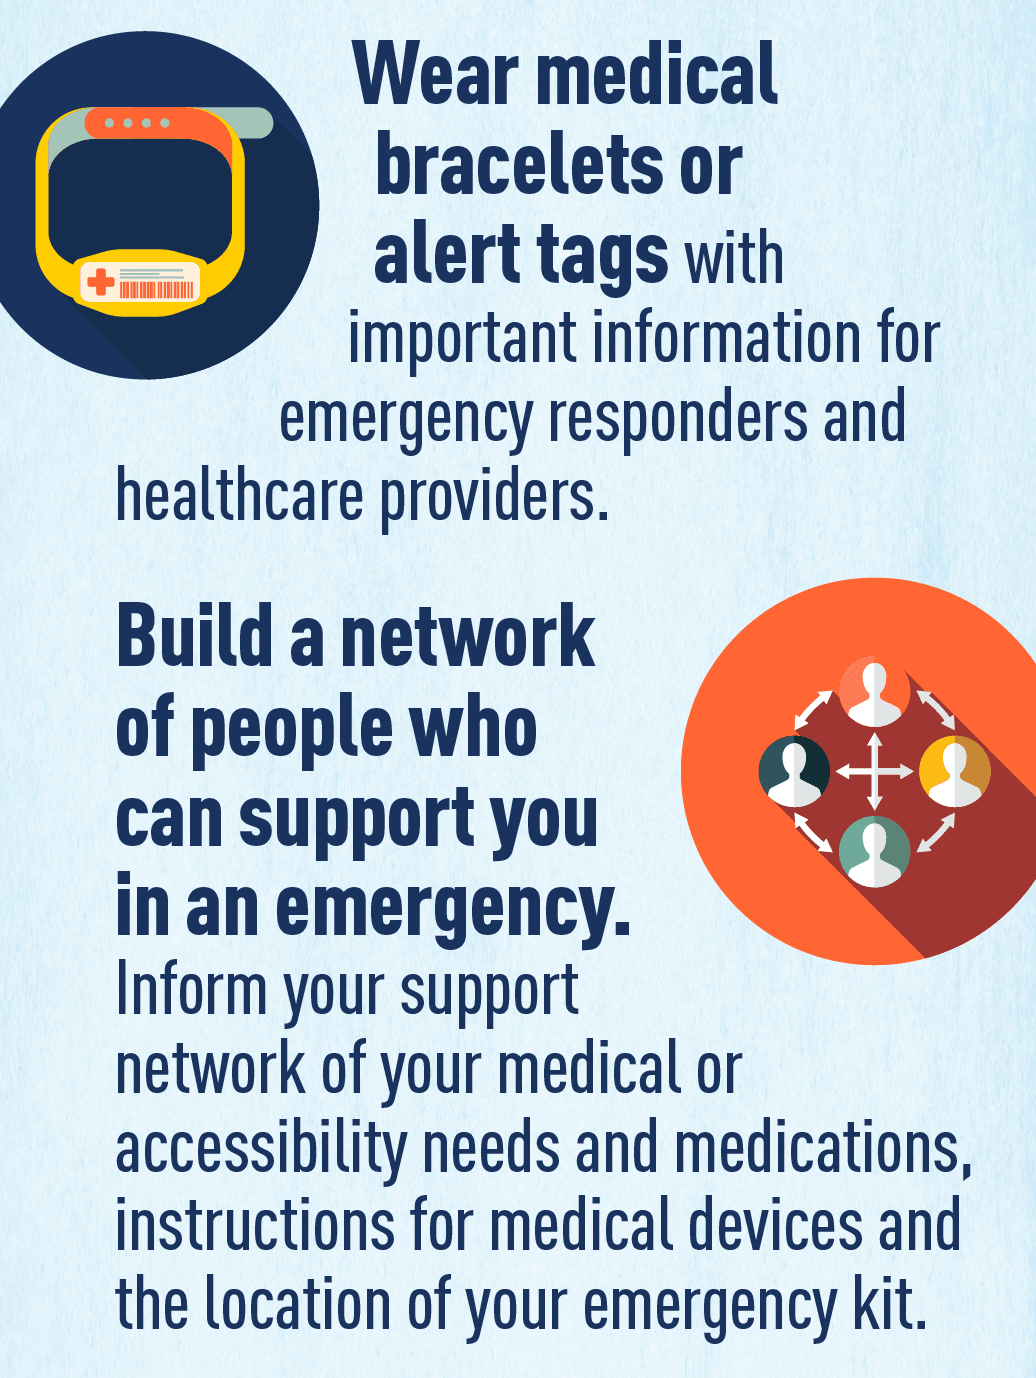 Image: Graphic of medical ID bracelet and graphic of personal network. Text: Wear medical bracelets or alert tags with important information for emergency responders and healthcare providers. Build a network of people who / 2 + can support you in an emergency. Inform your support network of your medical or accessibility needs and medications, instructions for medical devices and the location of your emergency kit.